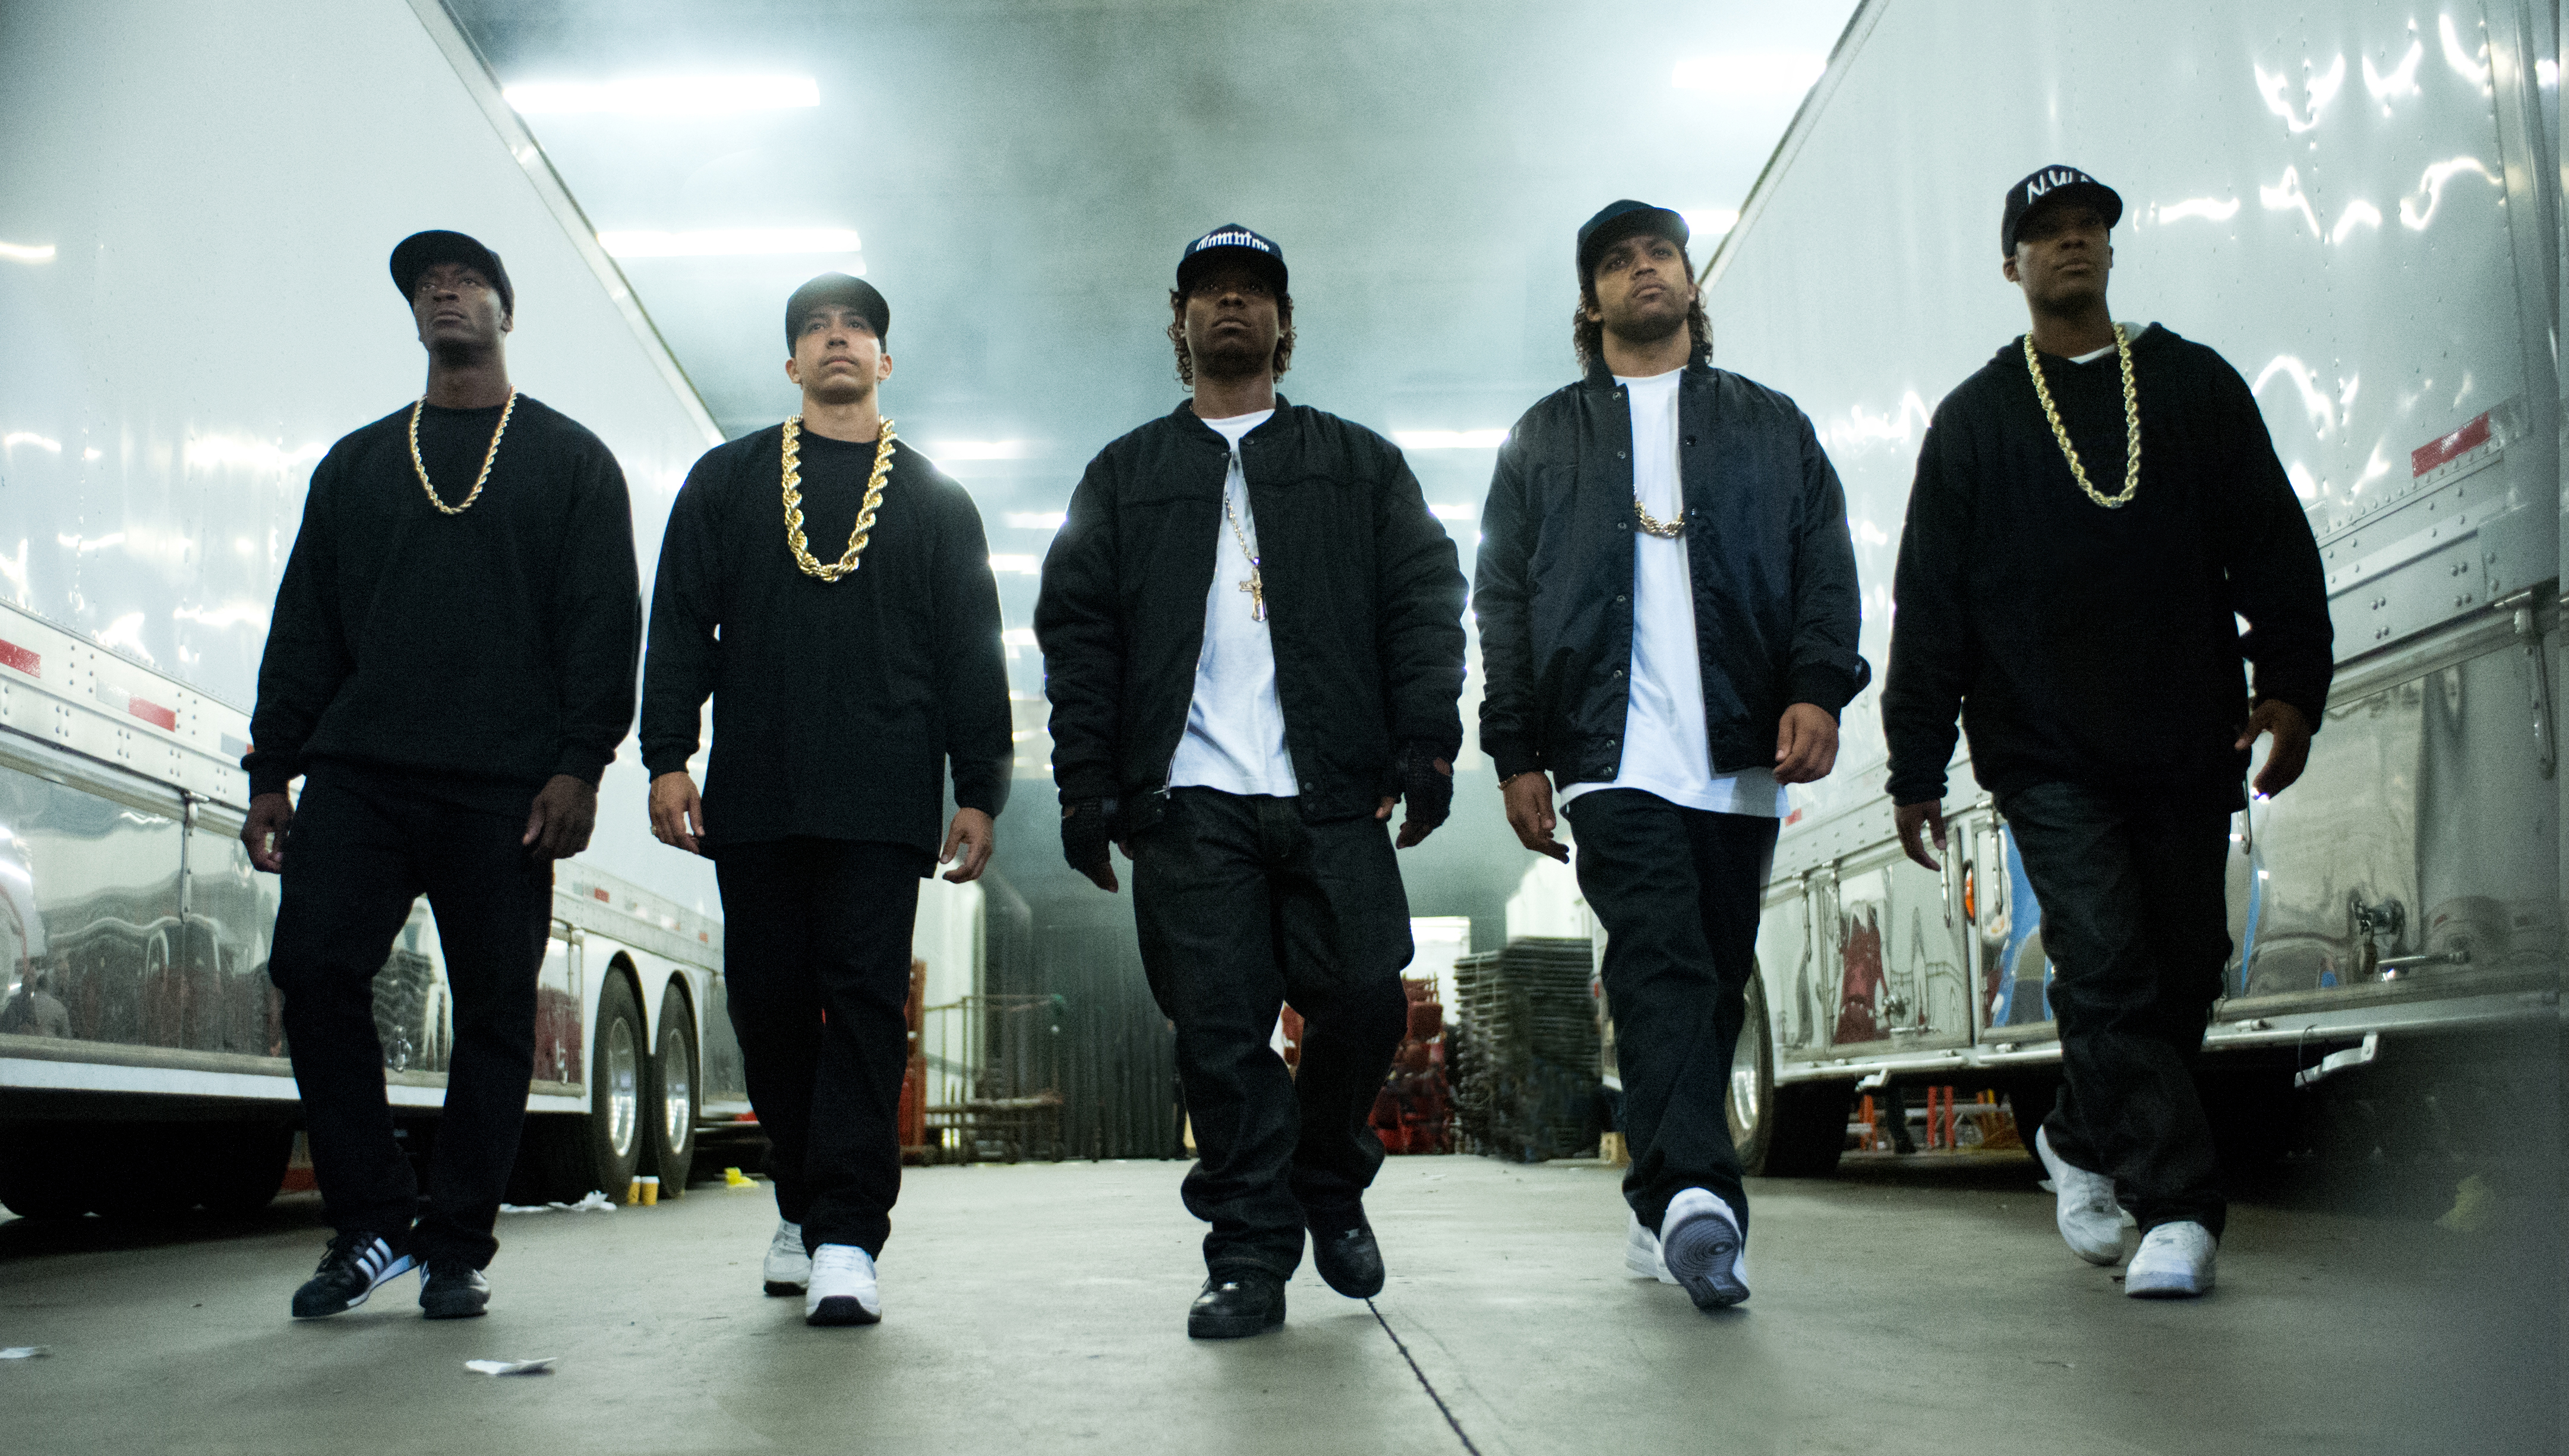 Watch the First Trailer for the NWA Biopic “Straight Outta Compton”